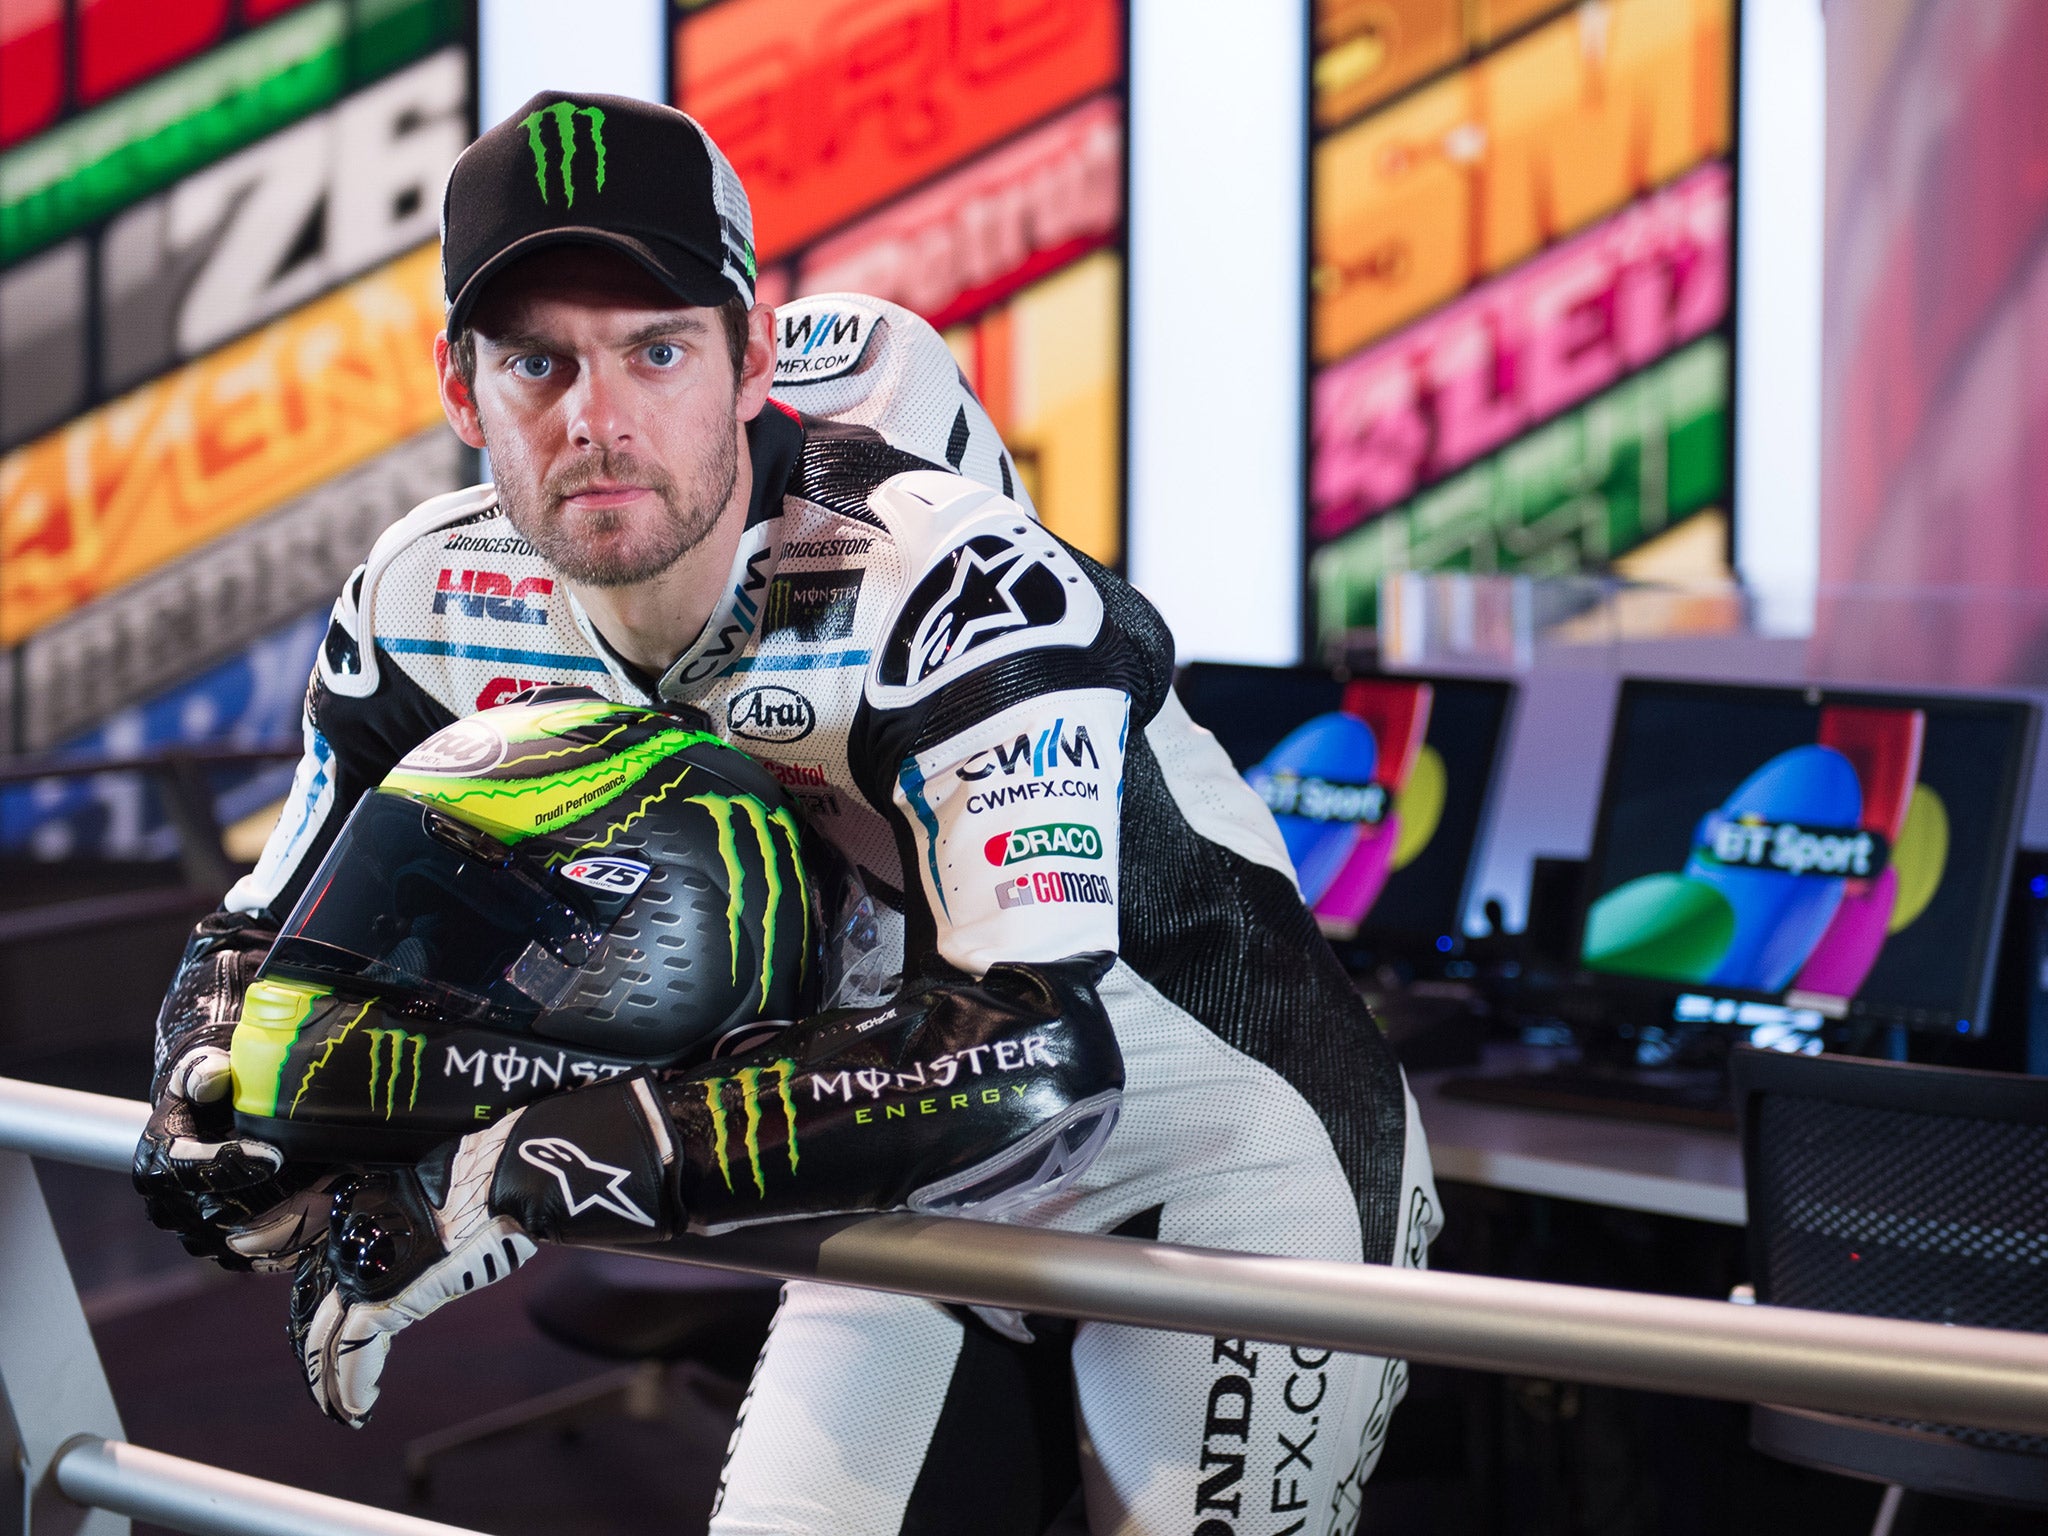 &#13;
Crutchlow won the Czech Grand Prix to end Britain's 35-year wait for a MotoGP winner &#13;